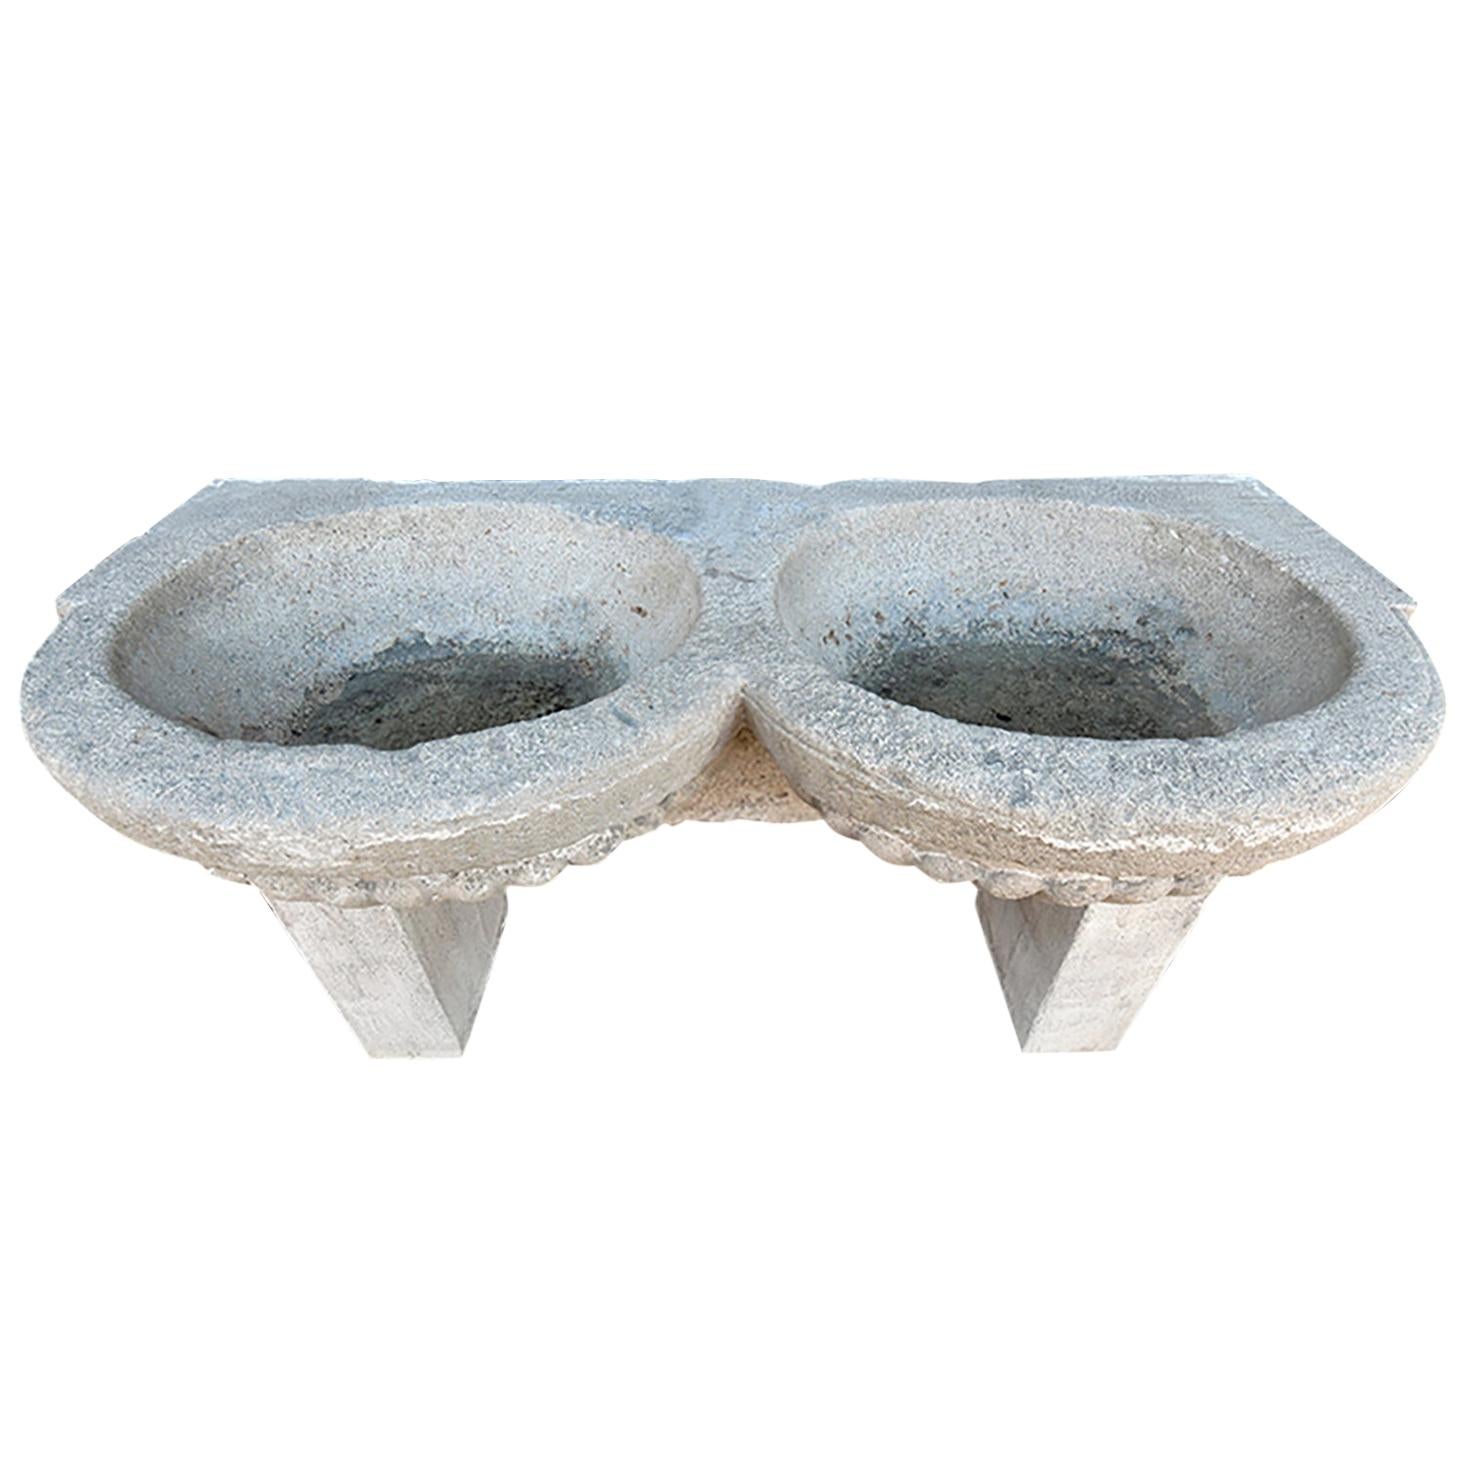 Antique French Sandstone Double Basin Sink, 19th Century